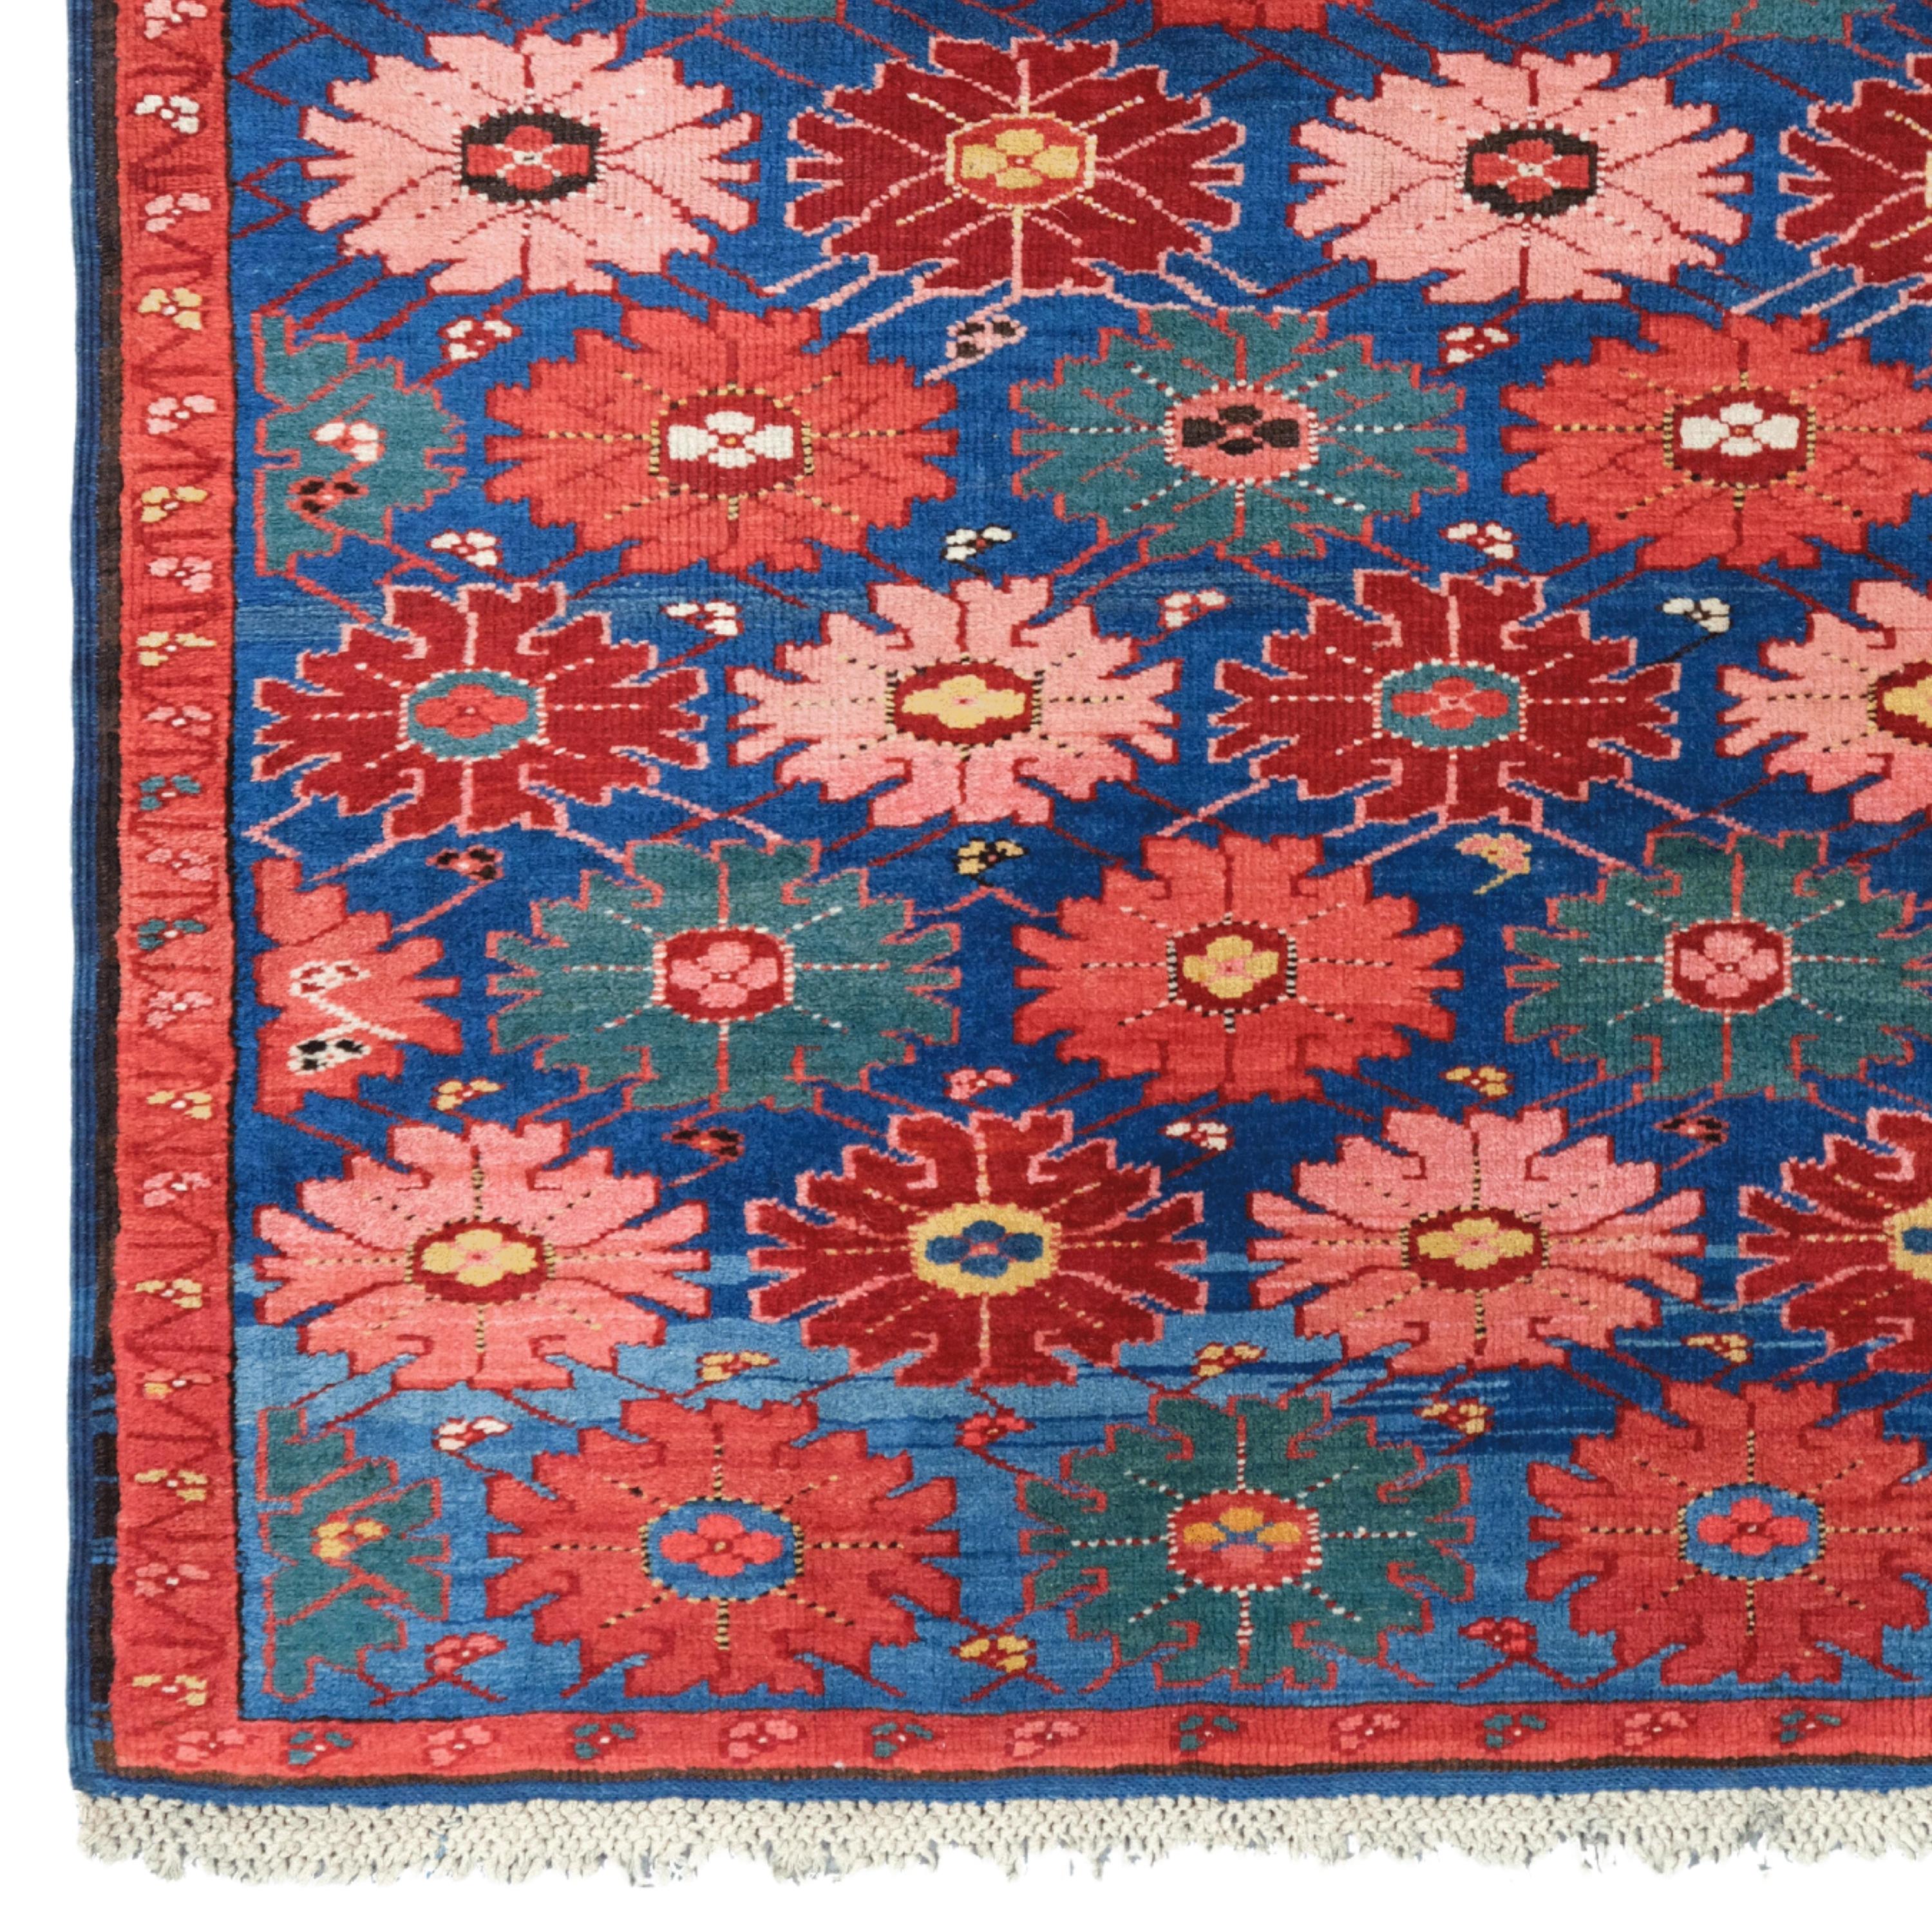 19th Century Caucasian Seichour Rug
Size: 120x190 cm

This impressive 19th-century Caucasian Seichour Tapestry is a masterpiece reflecting the elegant and sophisticated craftsmanship of a historic period.

Rich Patterns: The carpet is decorated with